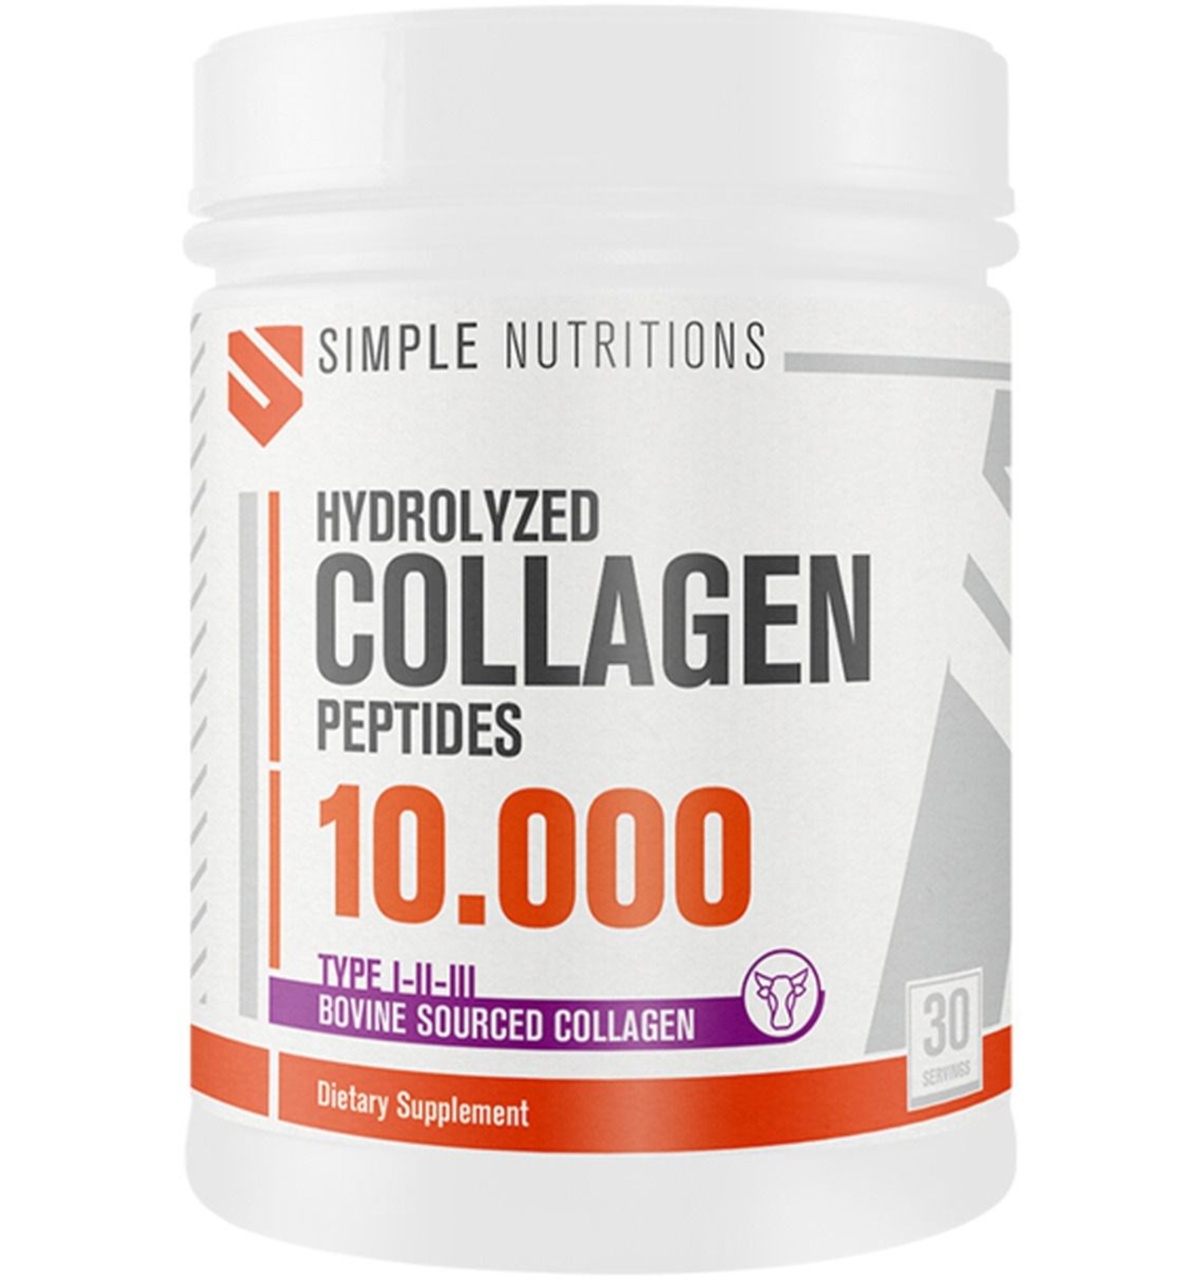 Simple Nutritions Hydrolyzed Collagen Peptides 300 G